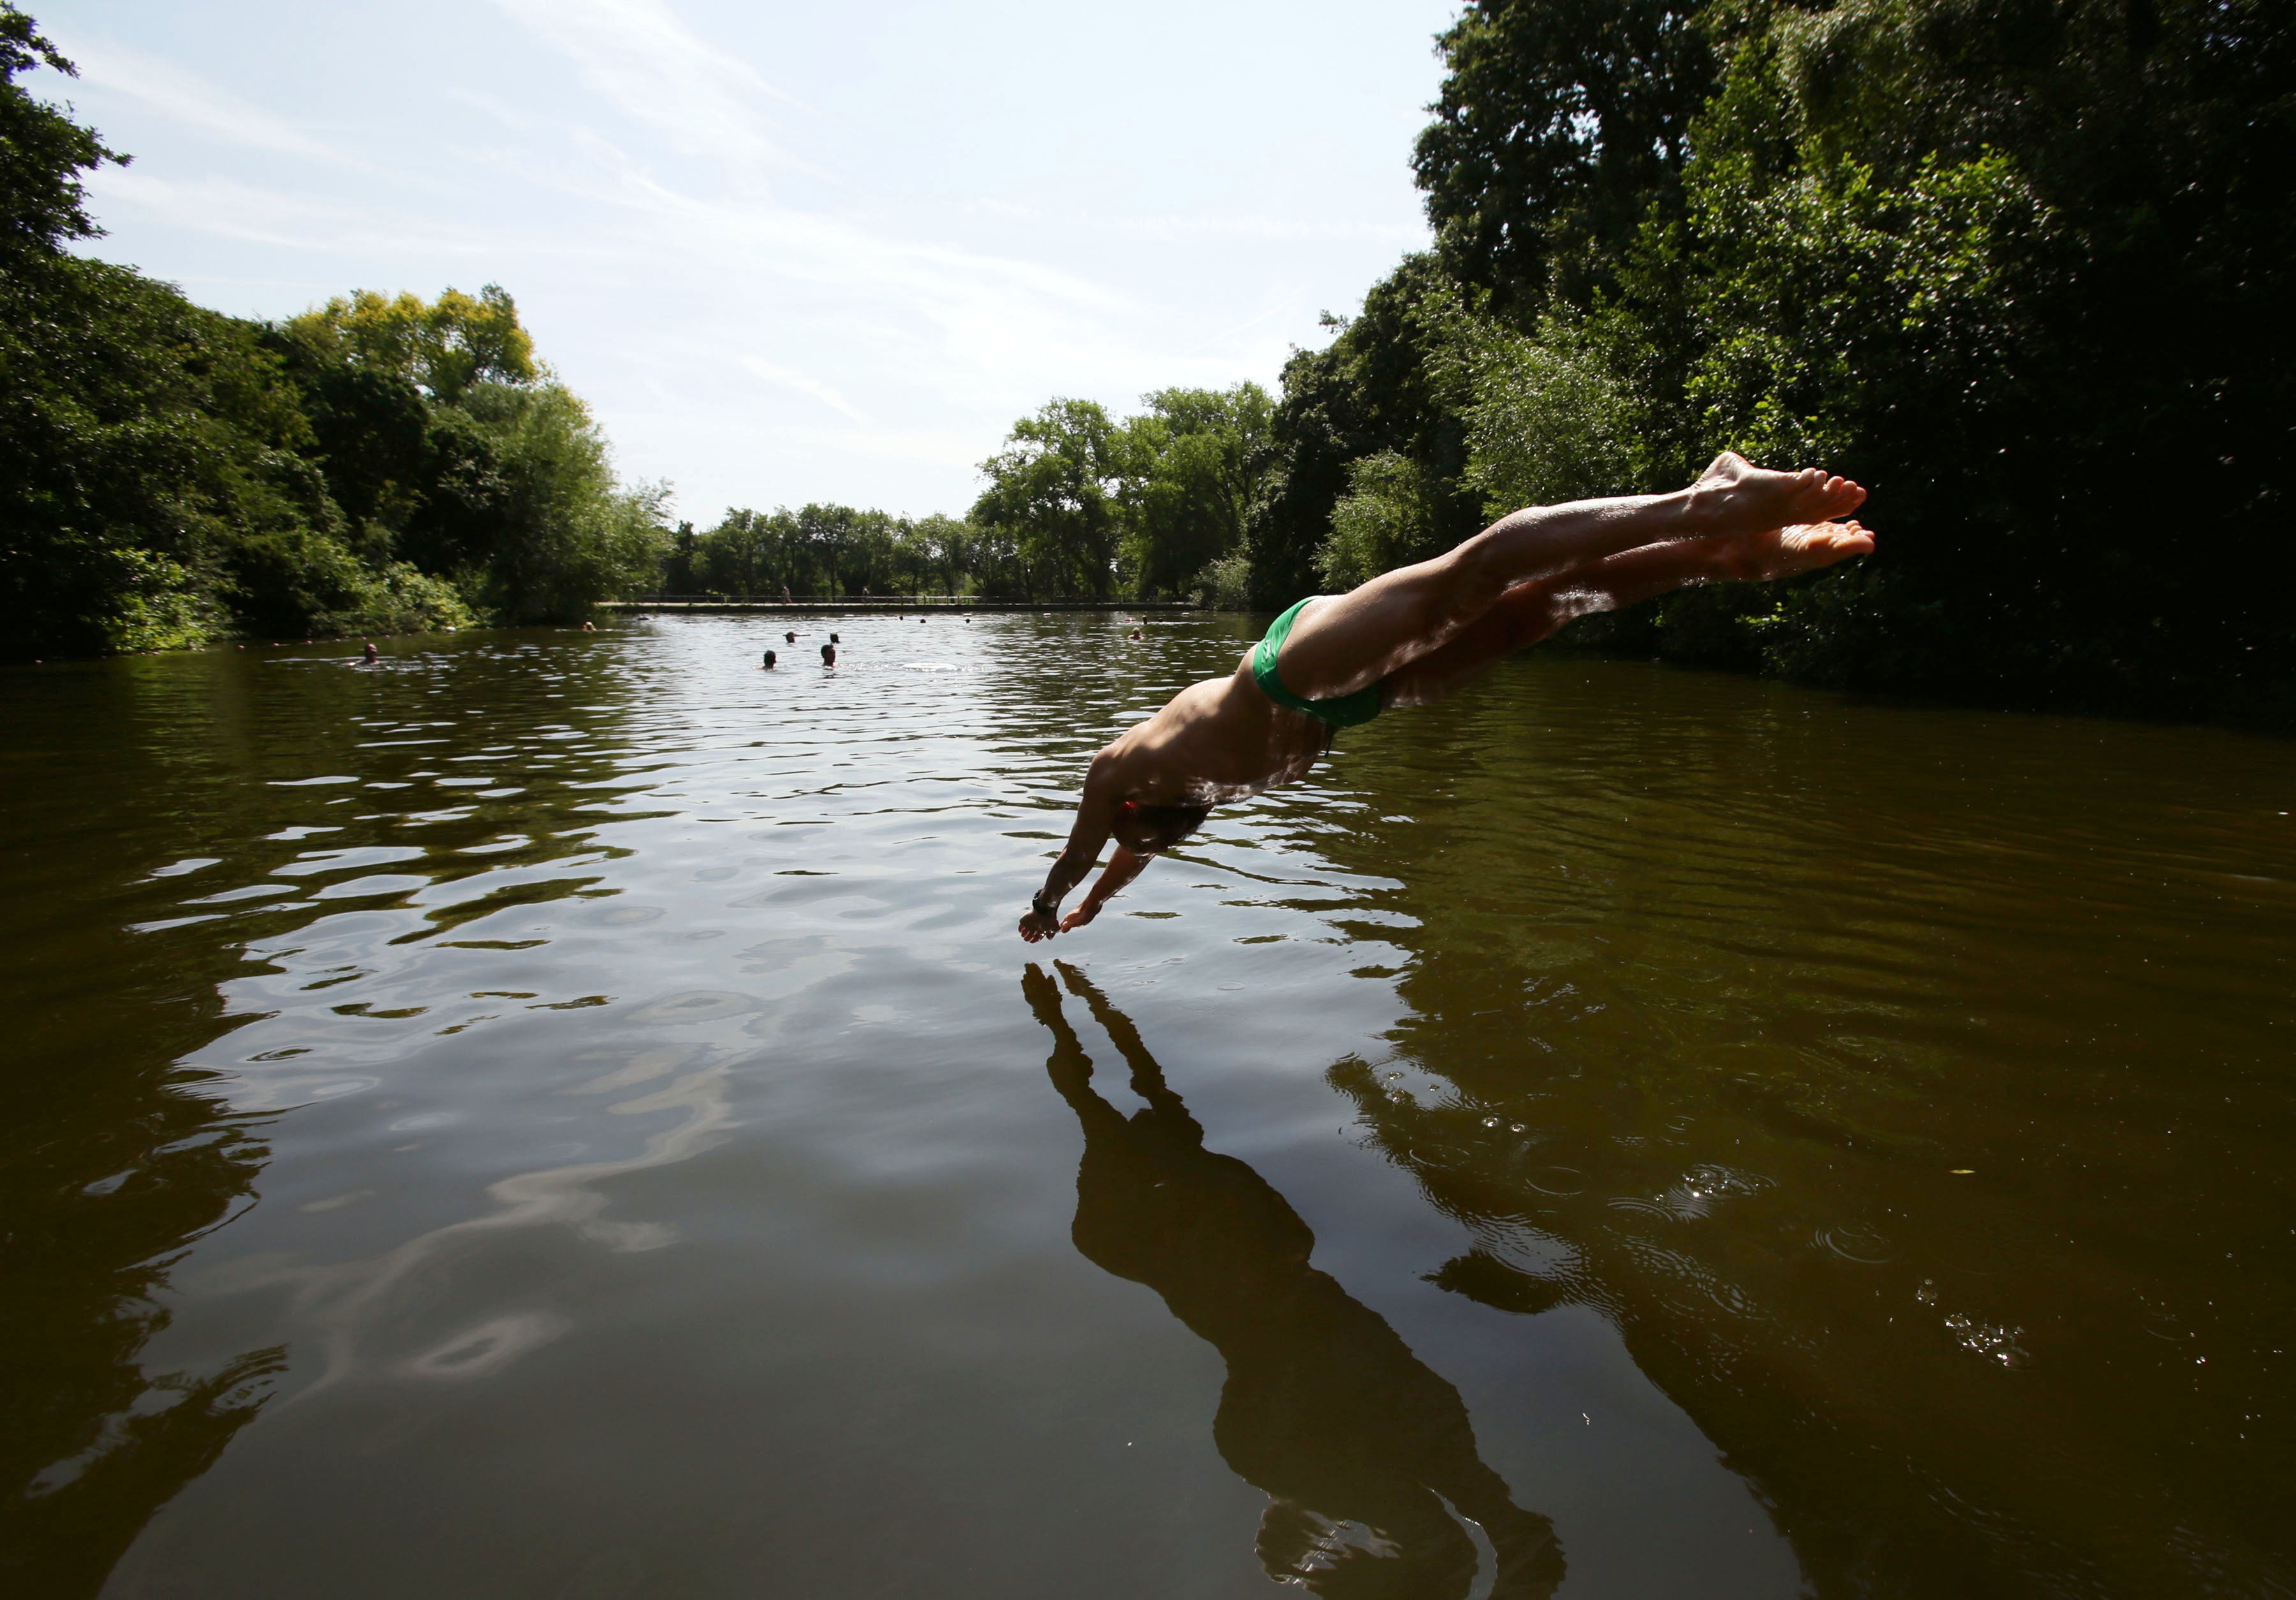 A record number of wild swimming spots have been designated as bathing sites in England